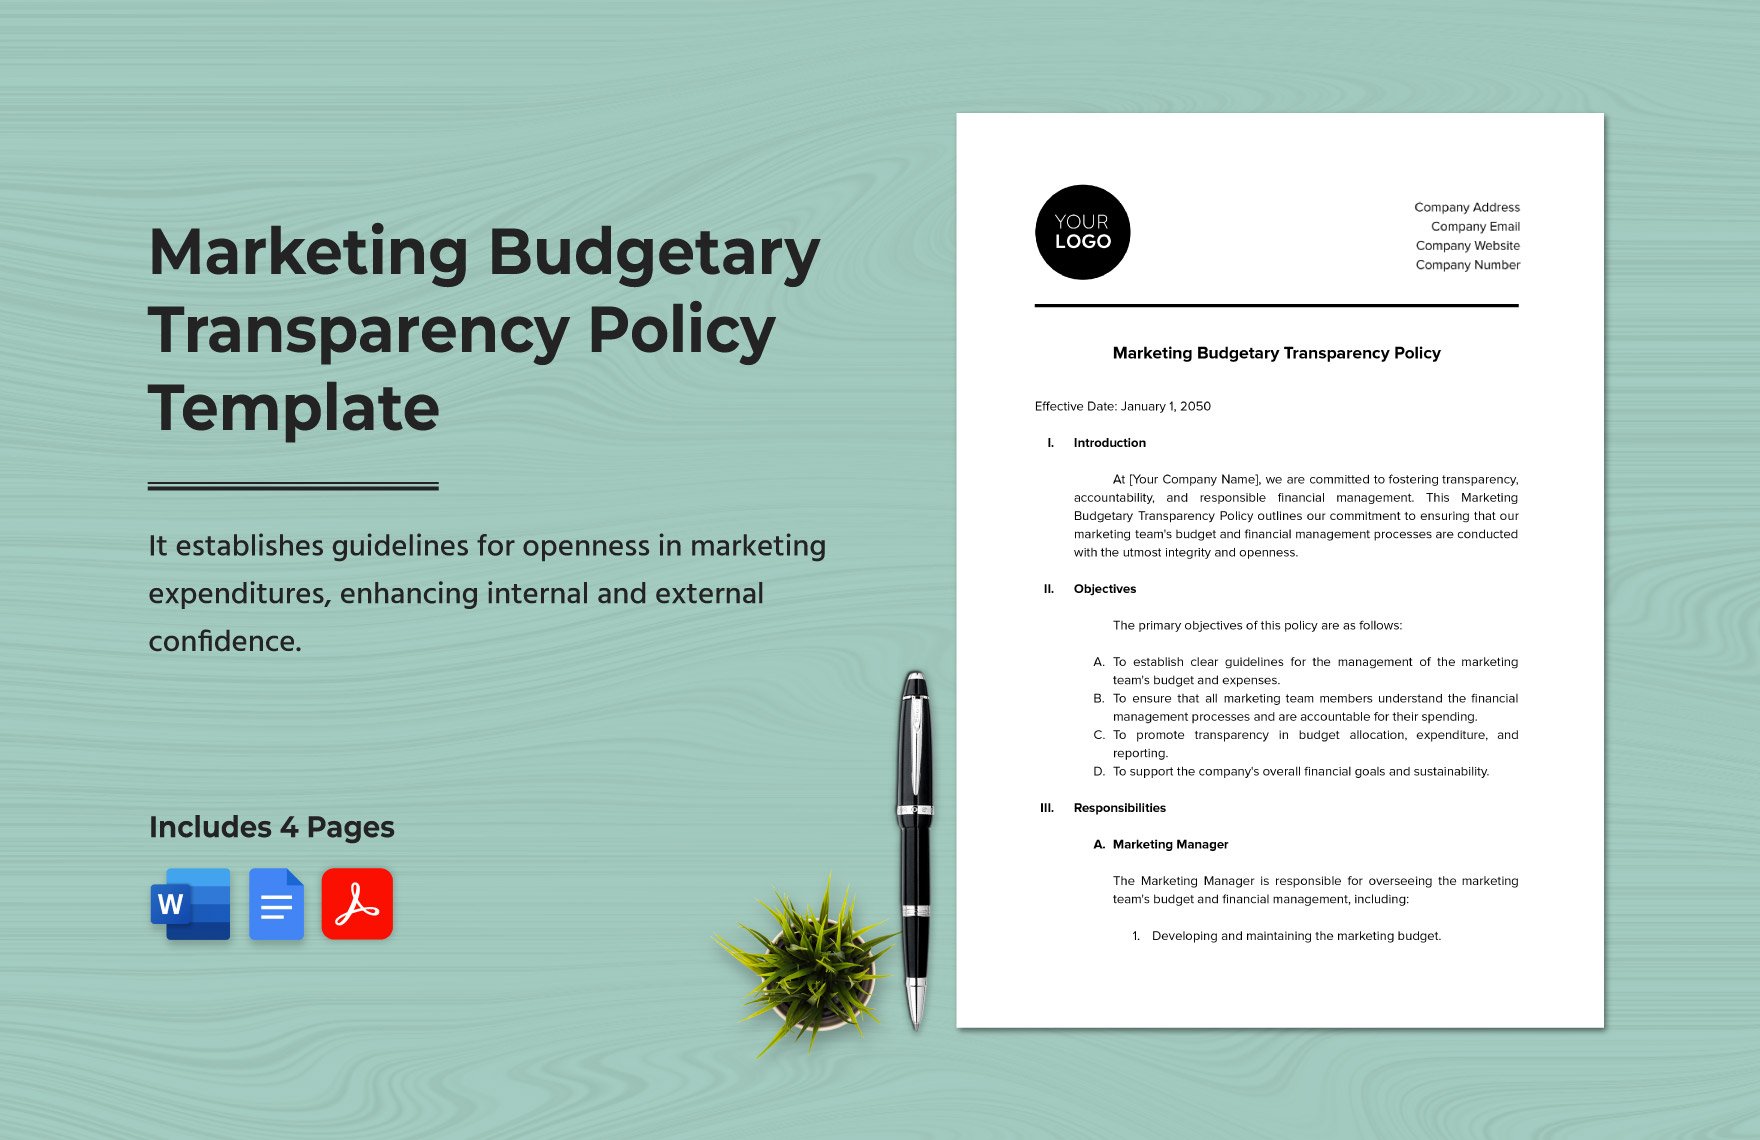 Marketing Budgetary Transparency Policy Template